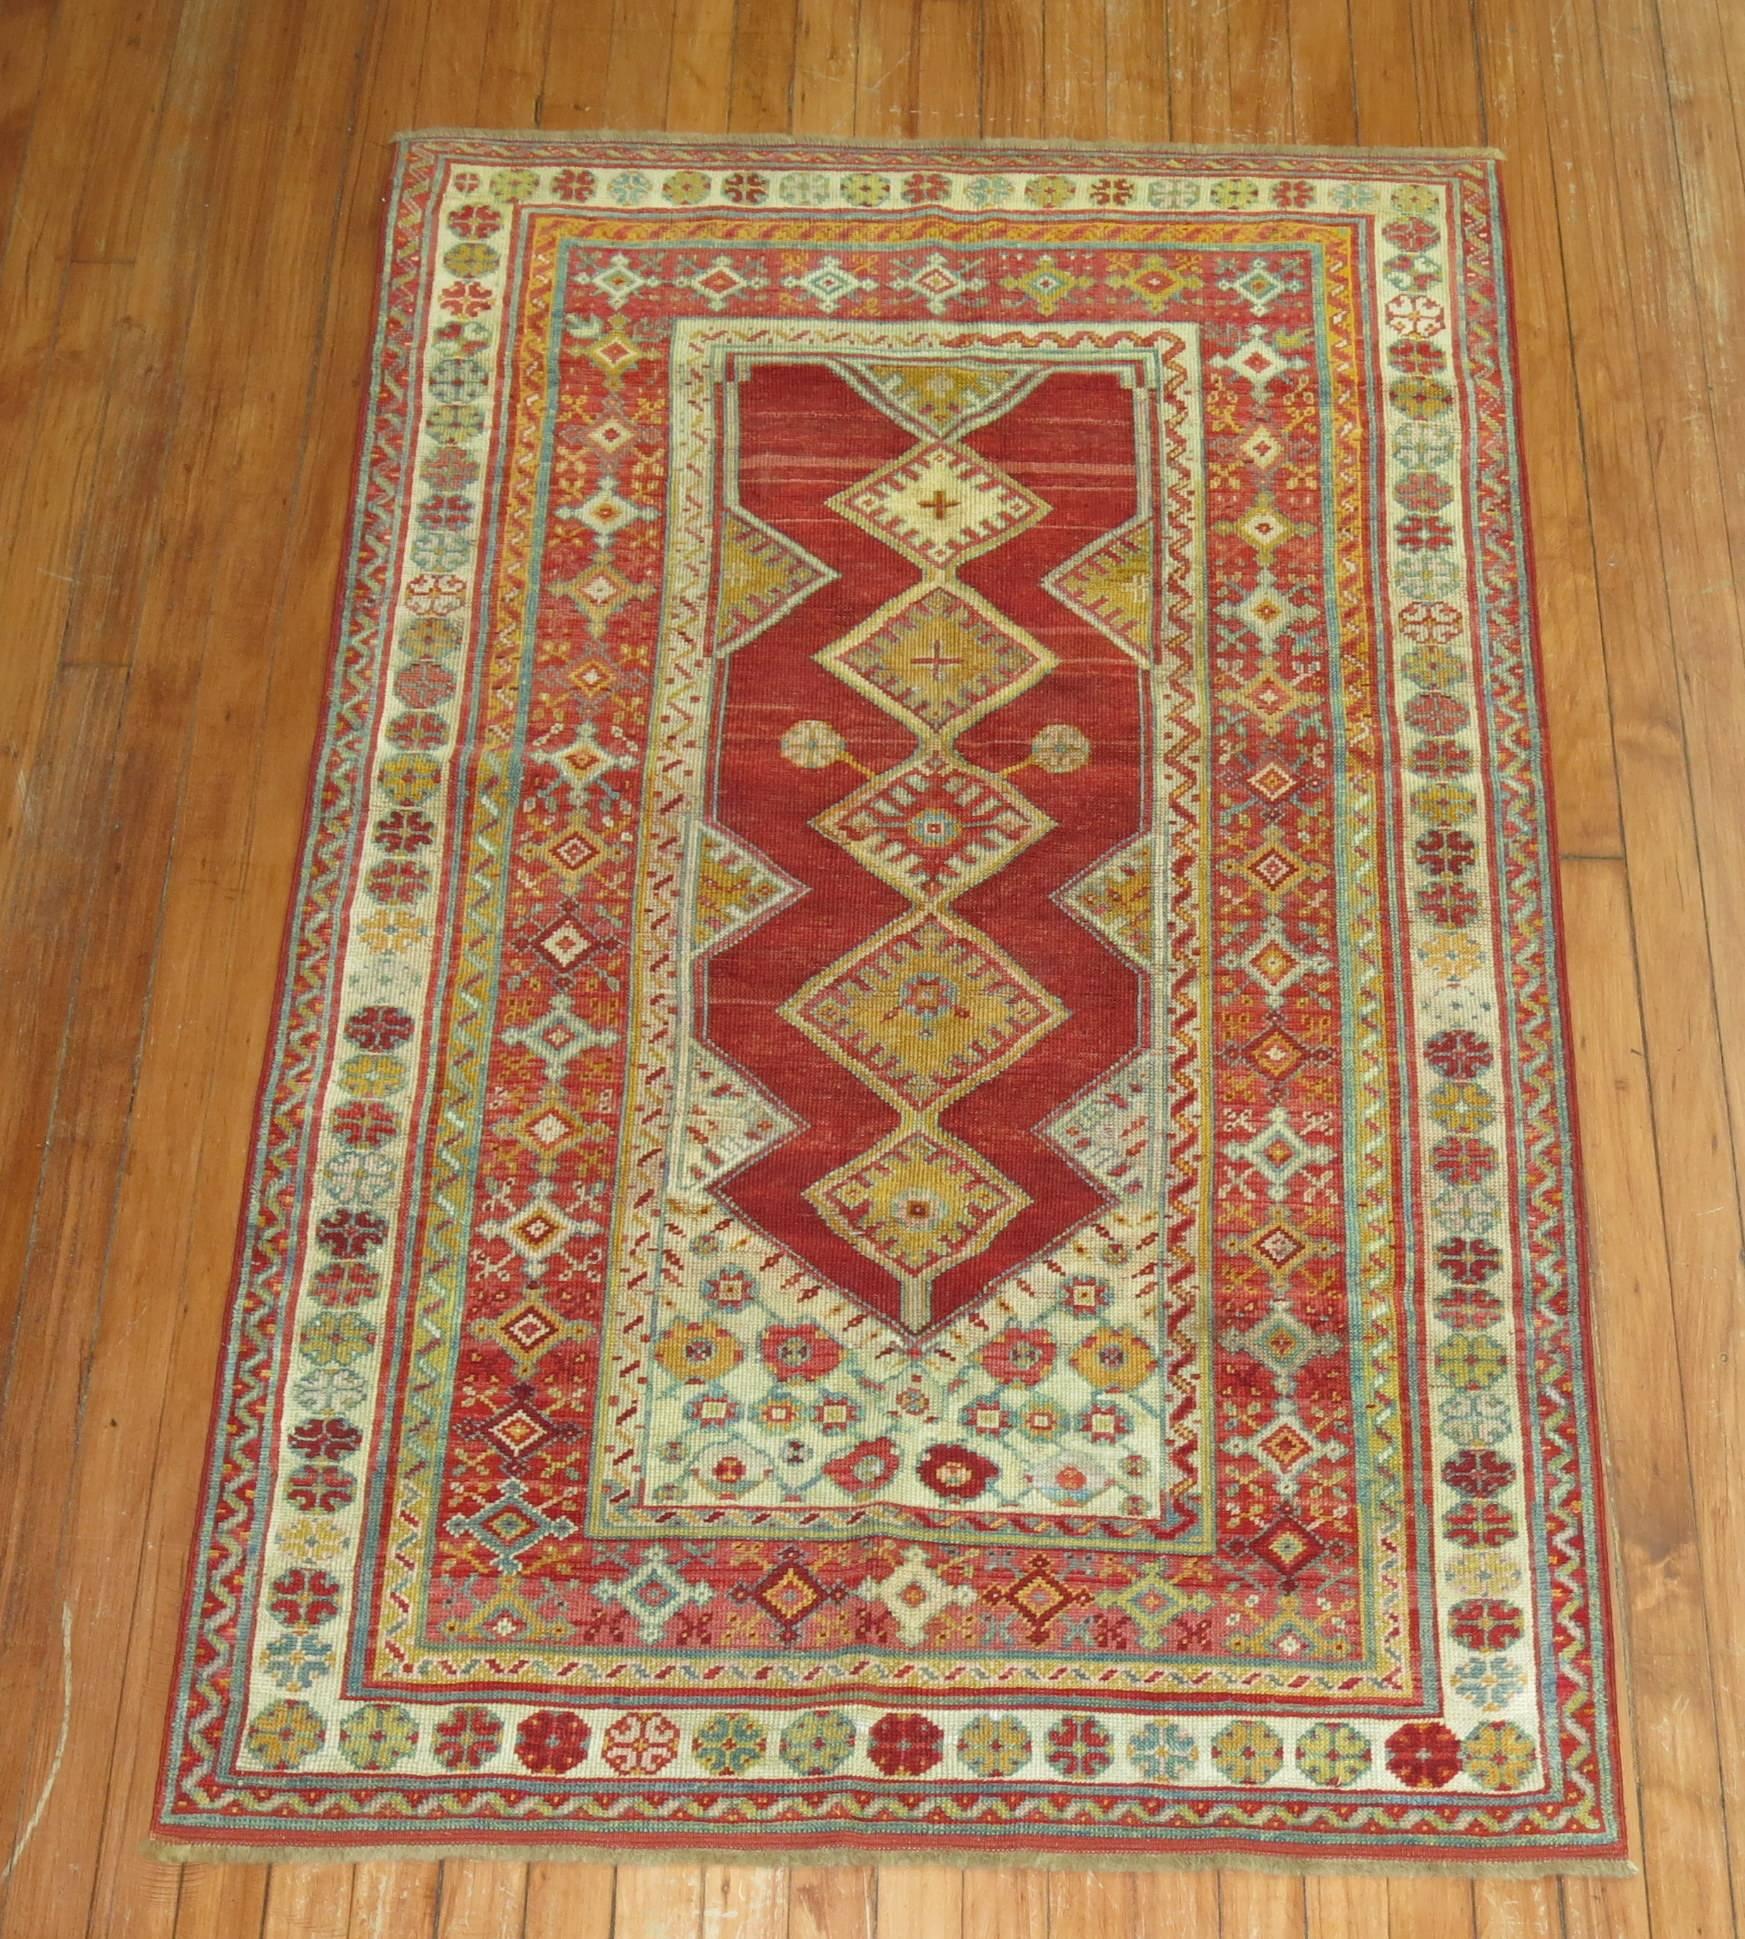 Colorful fine quality early 20th century Turkish Melas rug. Rich red and icy blue color accents.